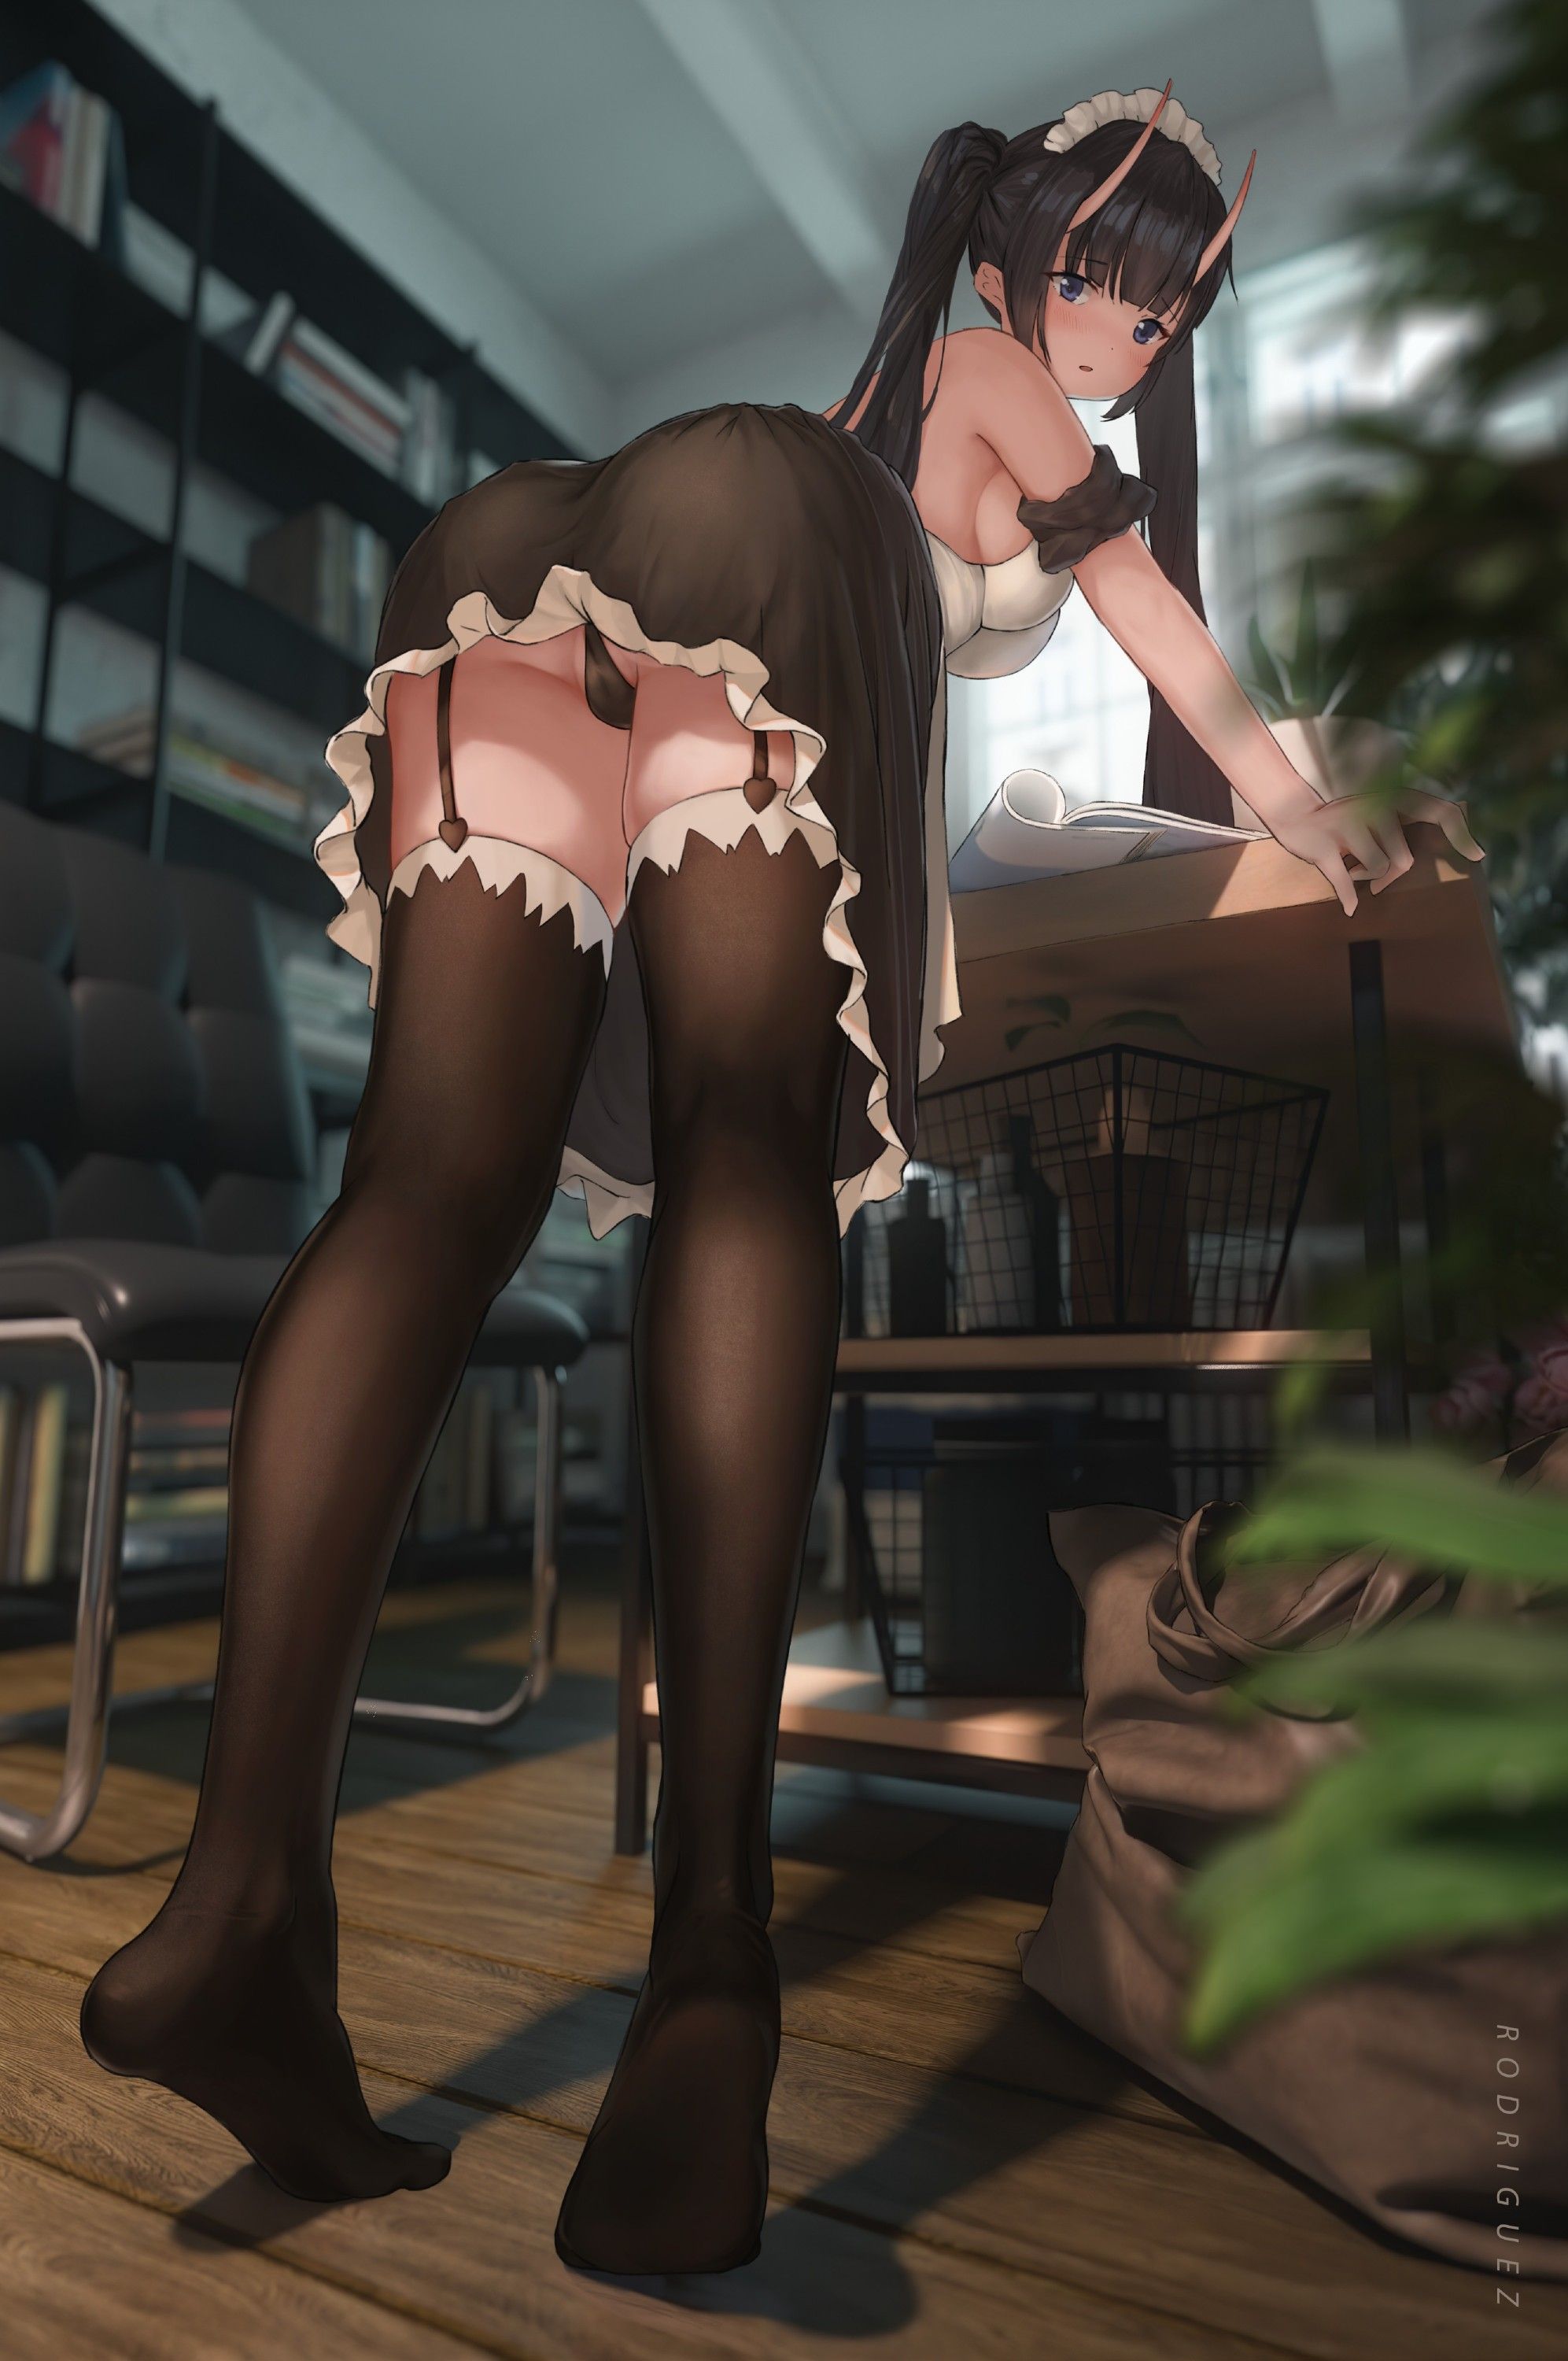 【2nd】Erotic image of a maid beautiful girl who wants to be served Part 29 9